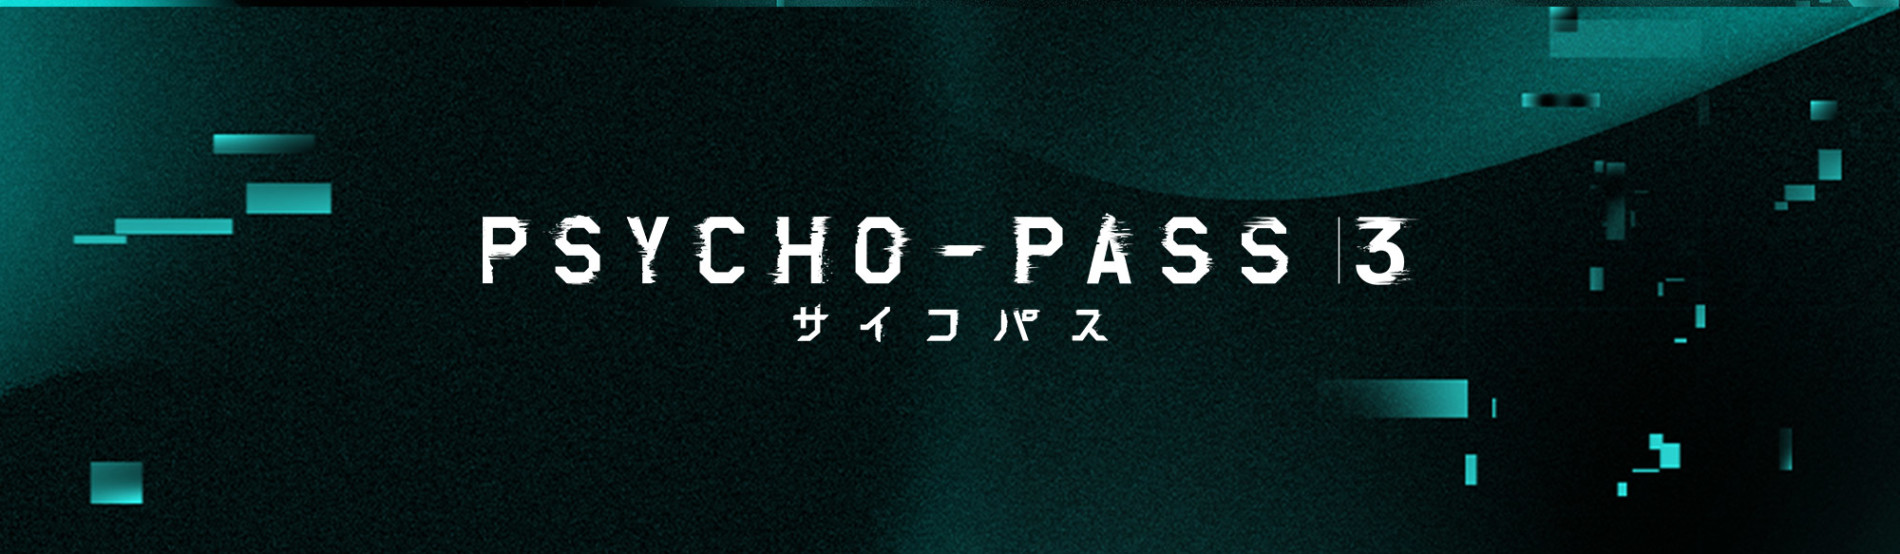 Banner for PSYCHO-PASS 3